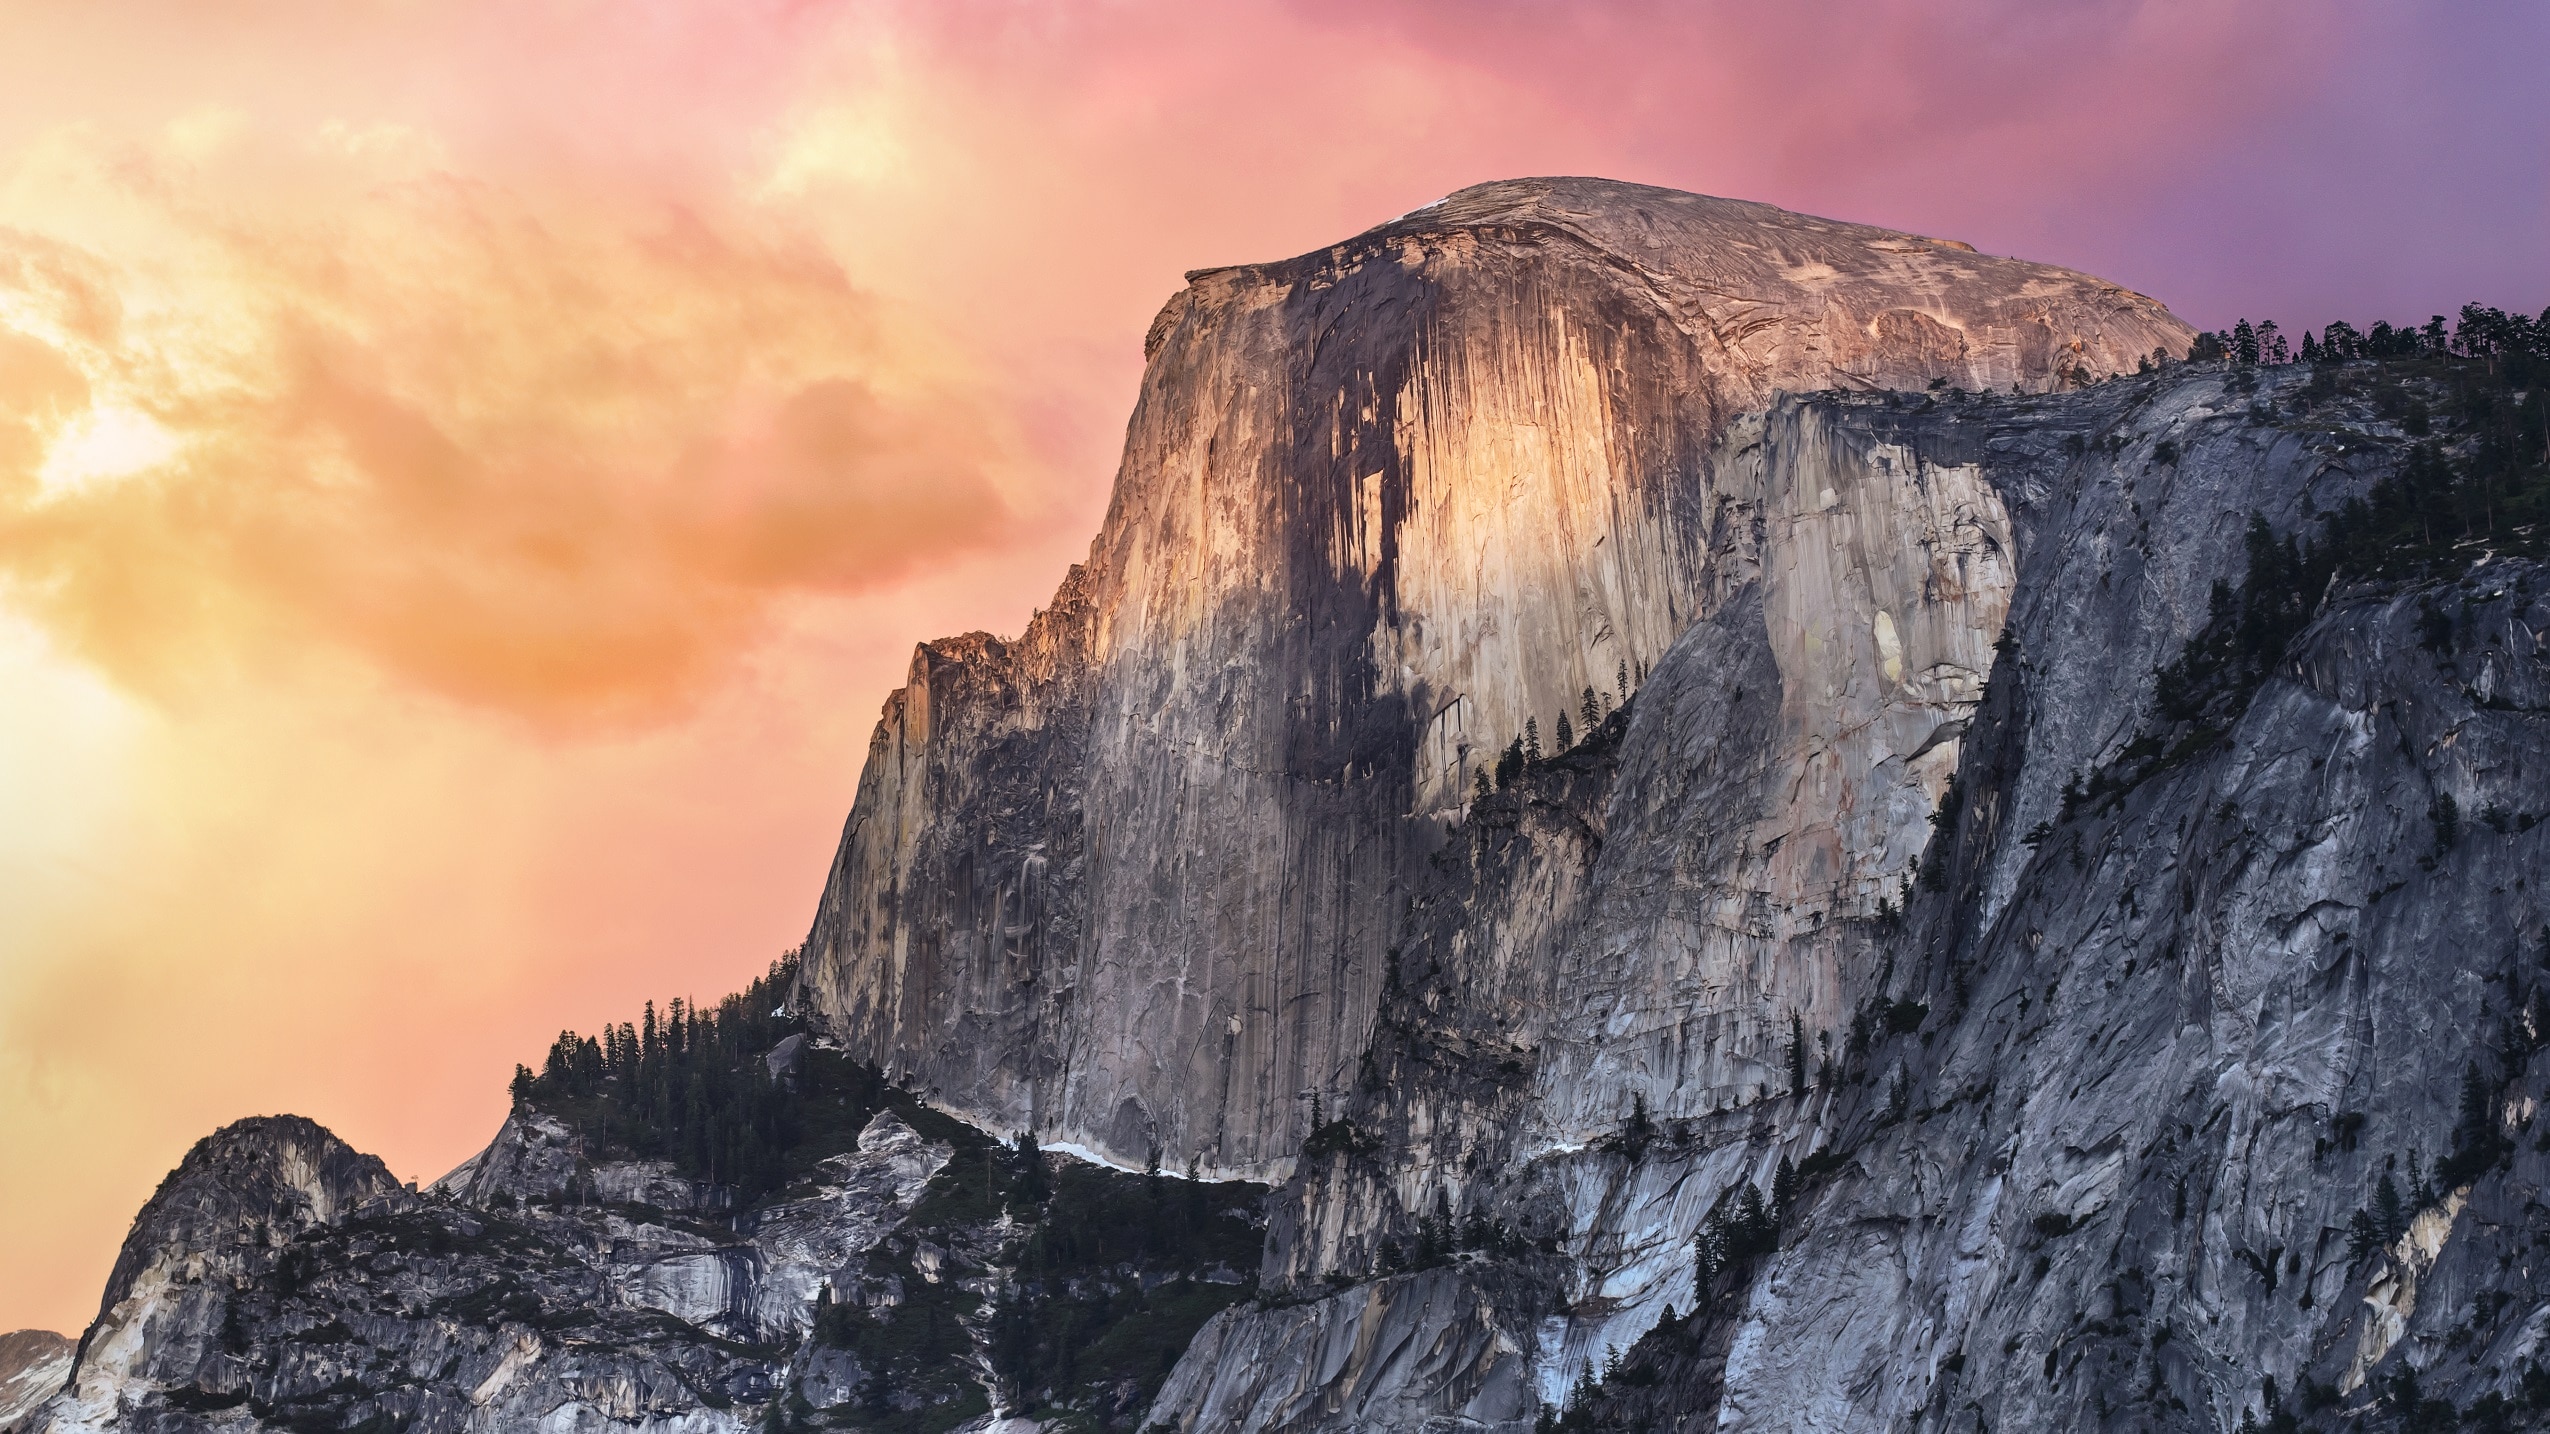 The best mountain wallpapers for Mac